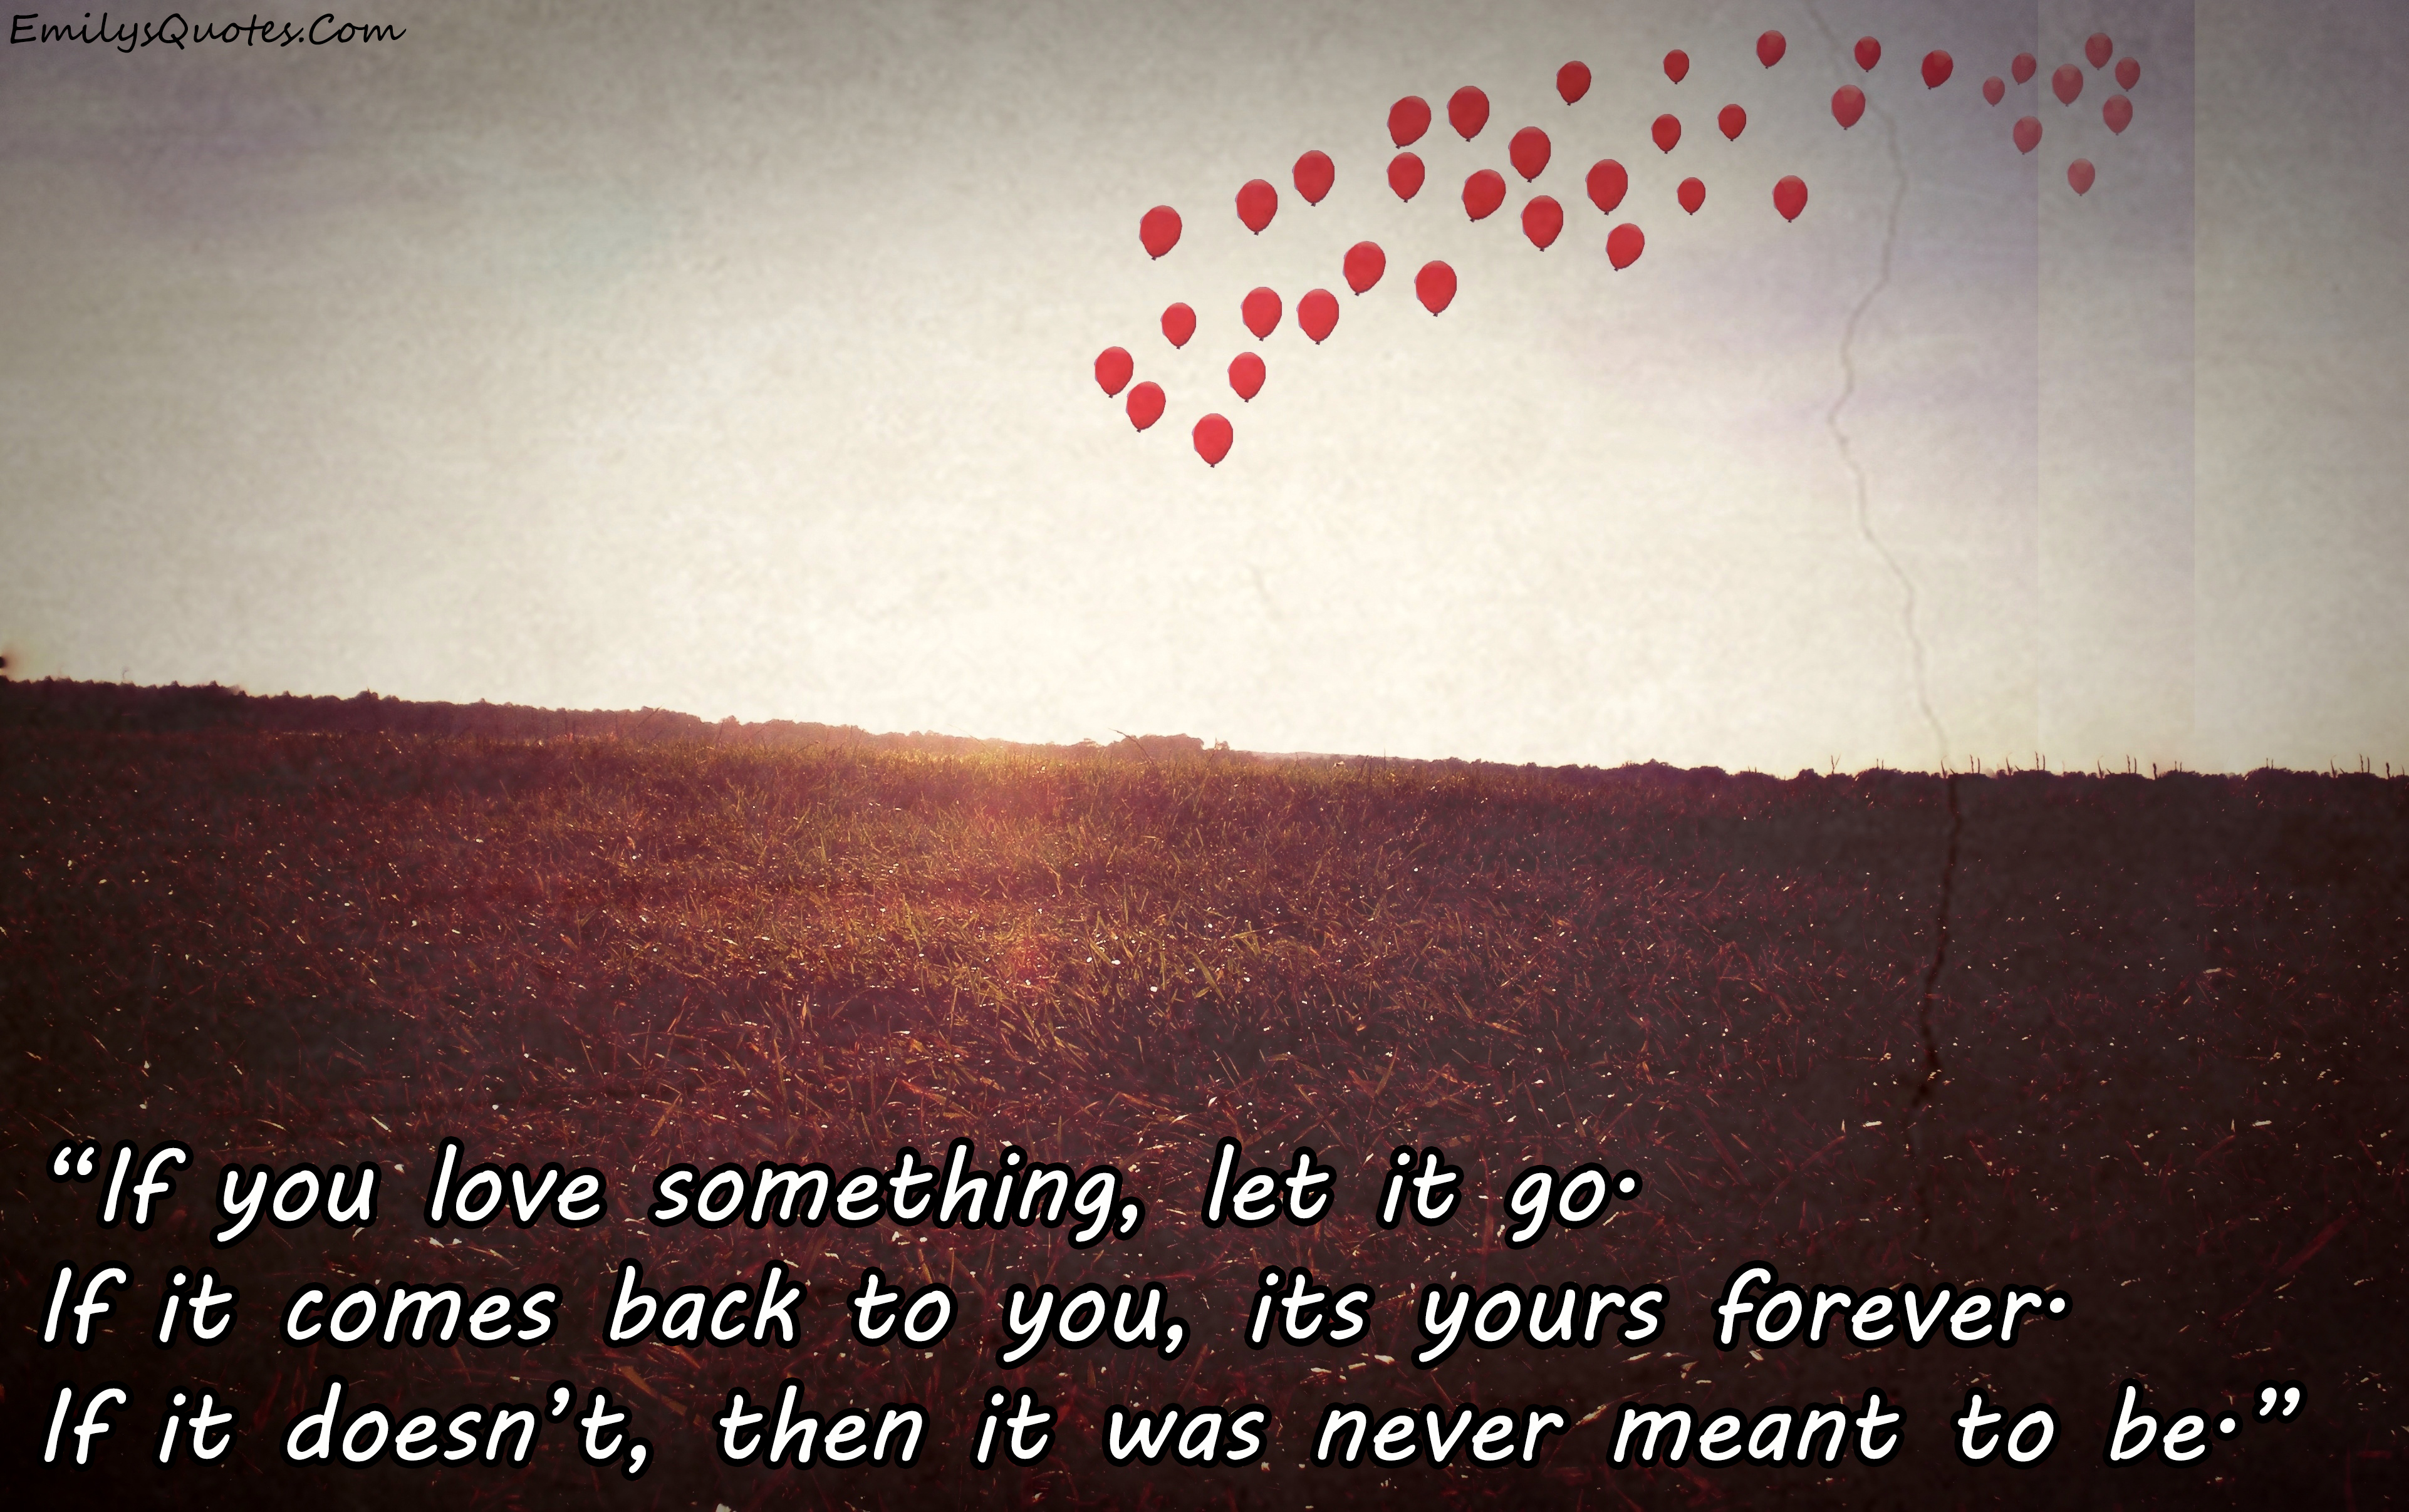 If you love something, let it go. If it comes back to you, it’s yours forever. If it doesn’t, then it was never meant to be